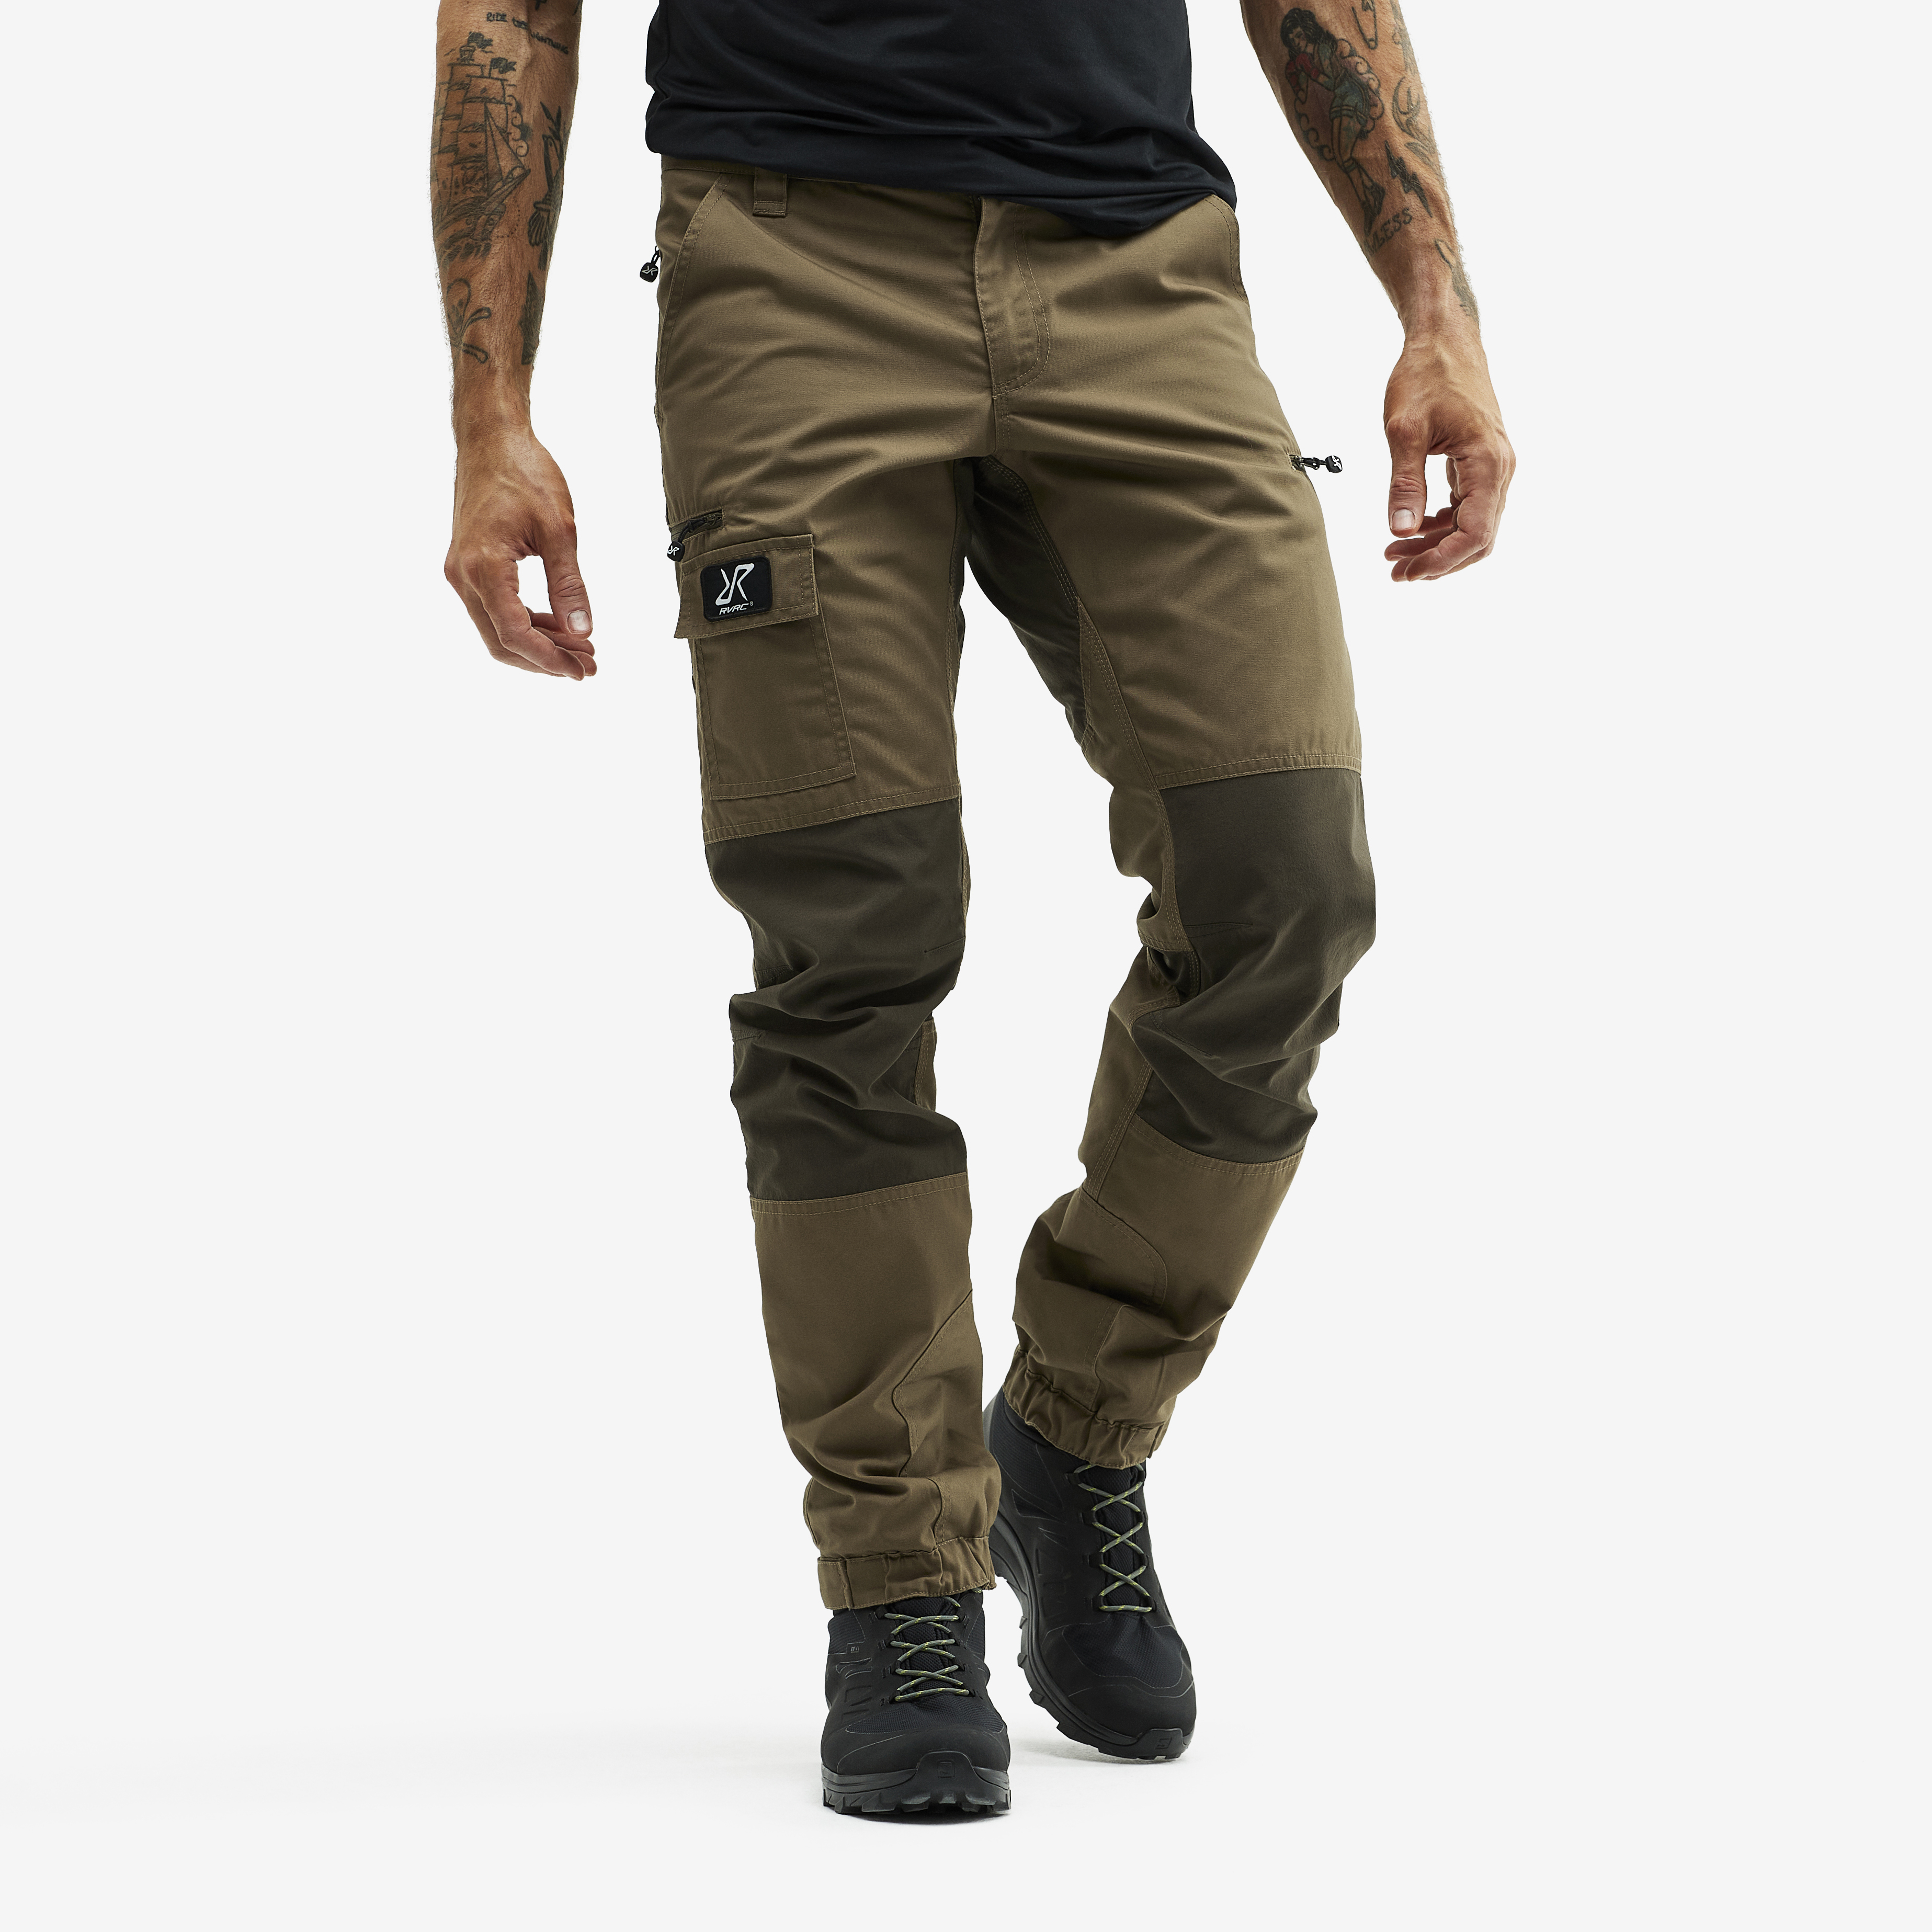 Nordwand walking trousers for men in brown